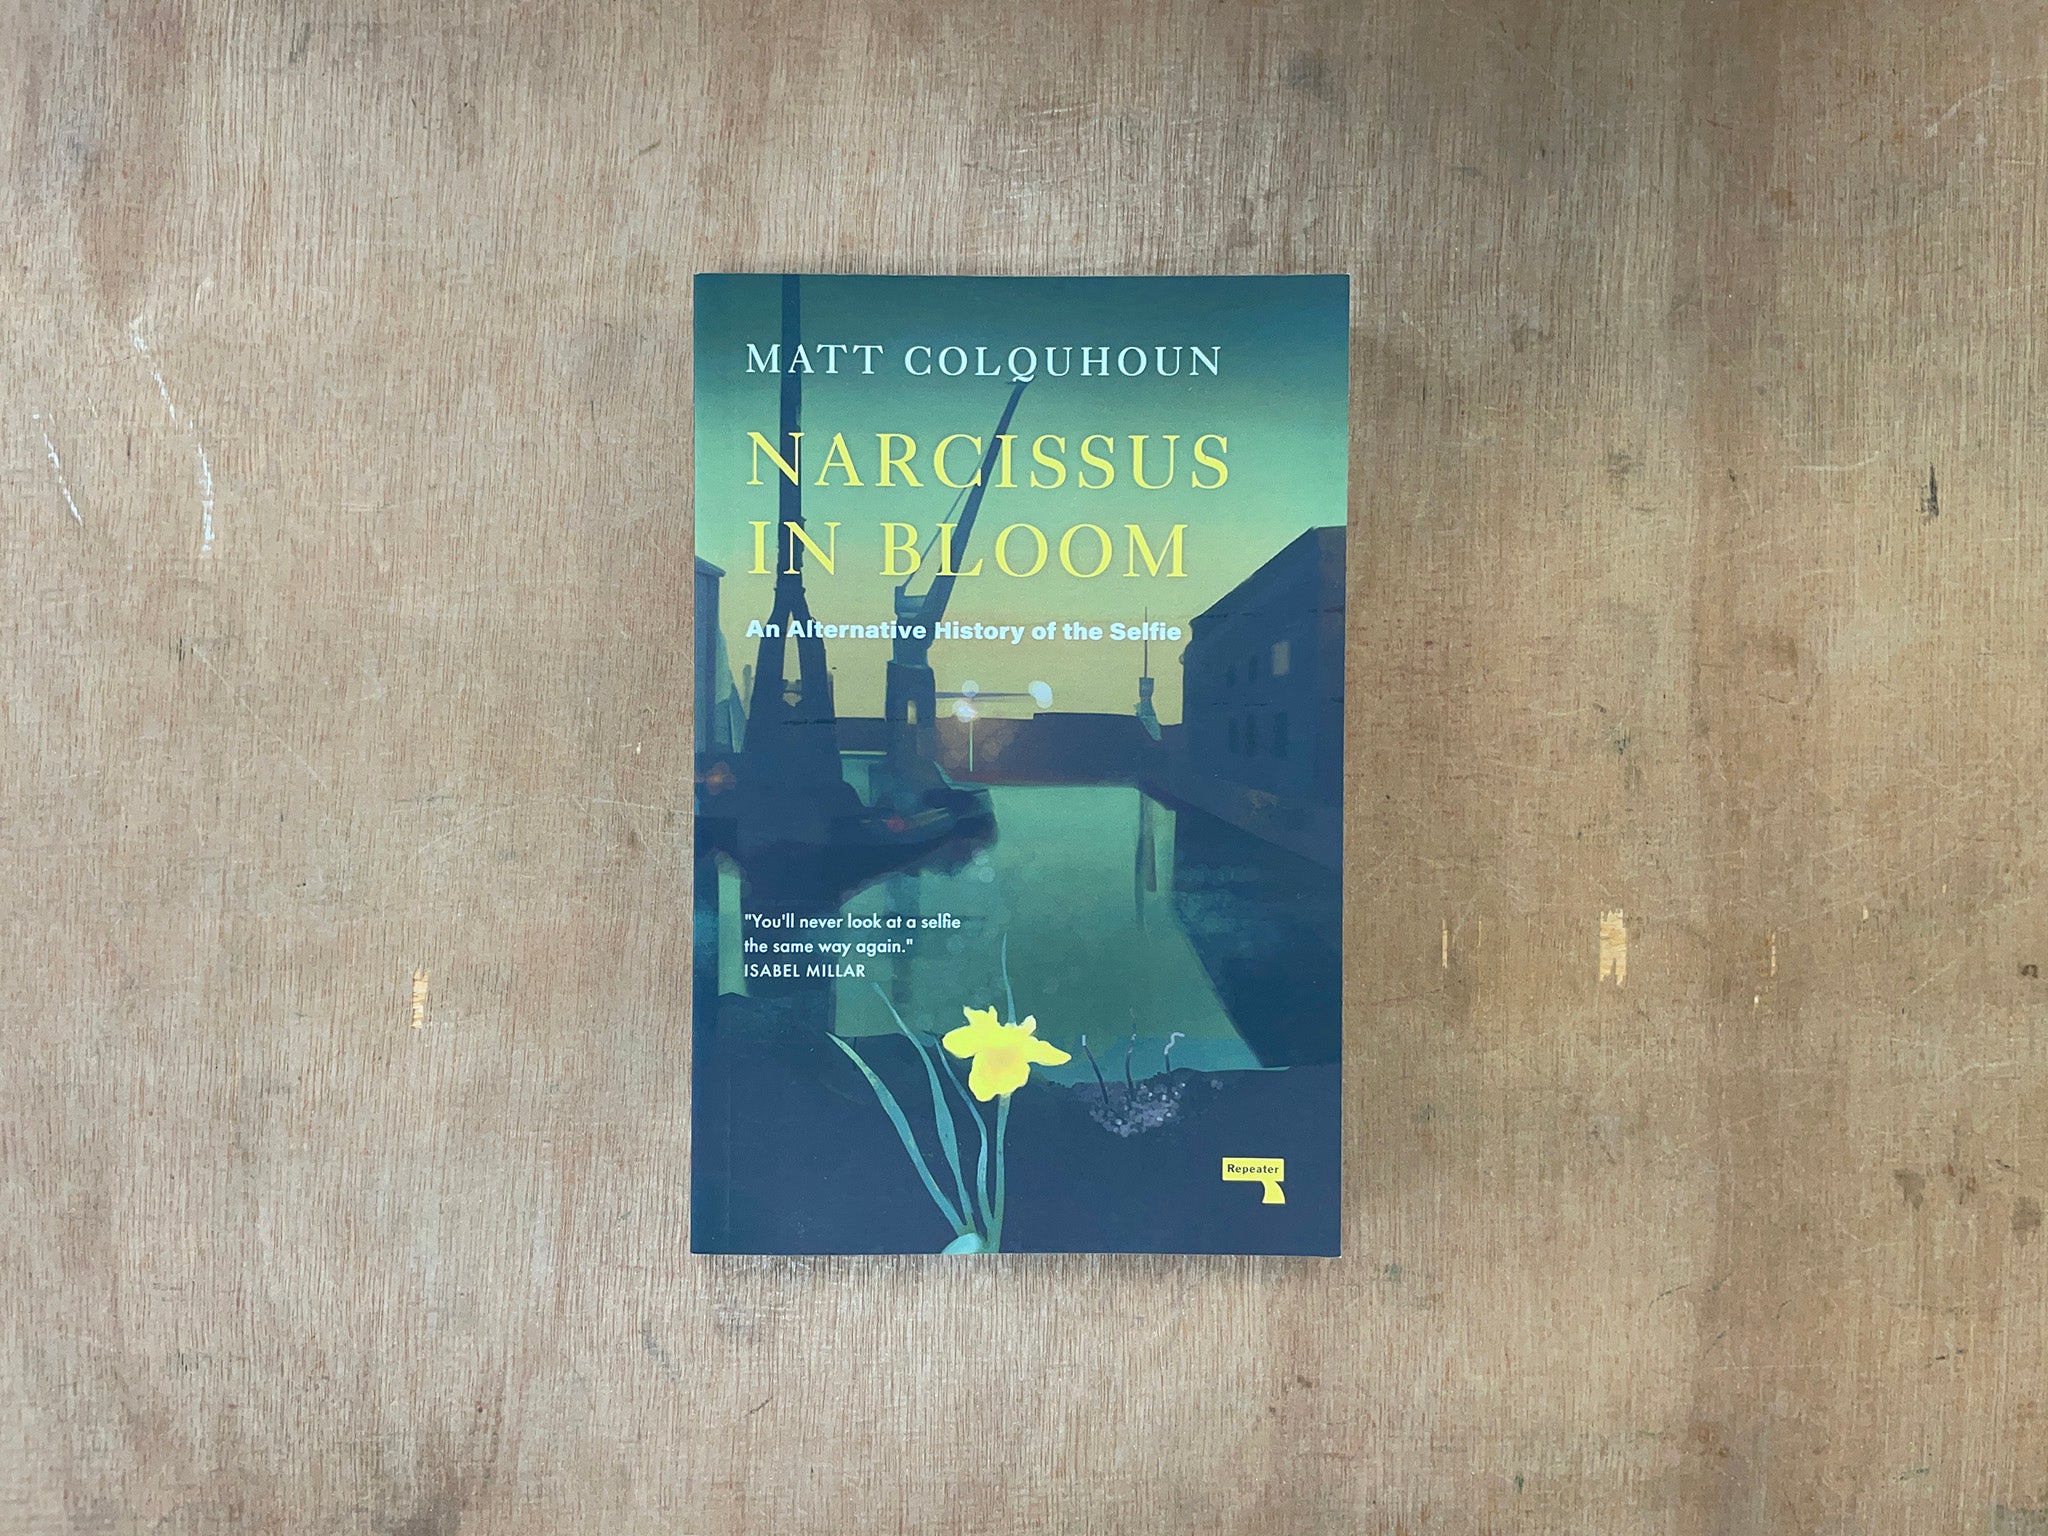 NARCISSUS IN BLOOM: AN ALTERNATIVE HISTORY OF THE SELFIE by Matt Colquhoun